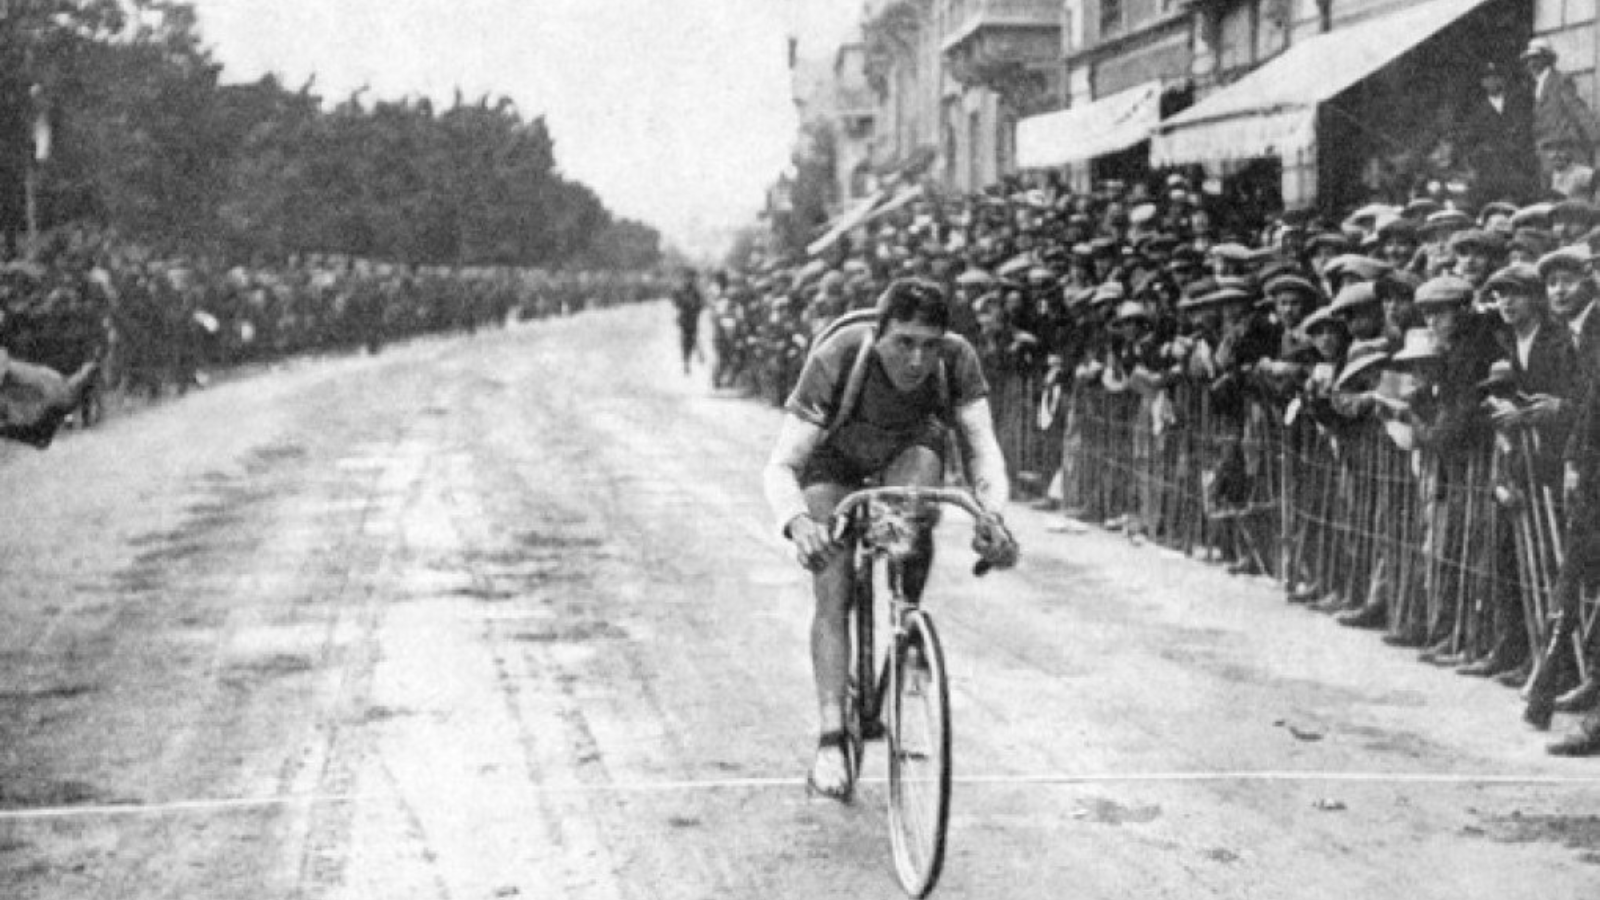 French cyclist Jean Alavoine arriving in the finish at Tour de France